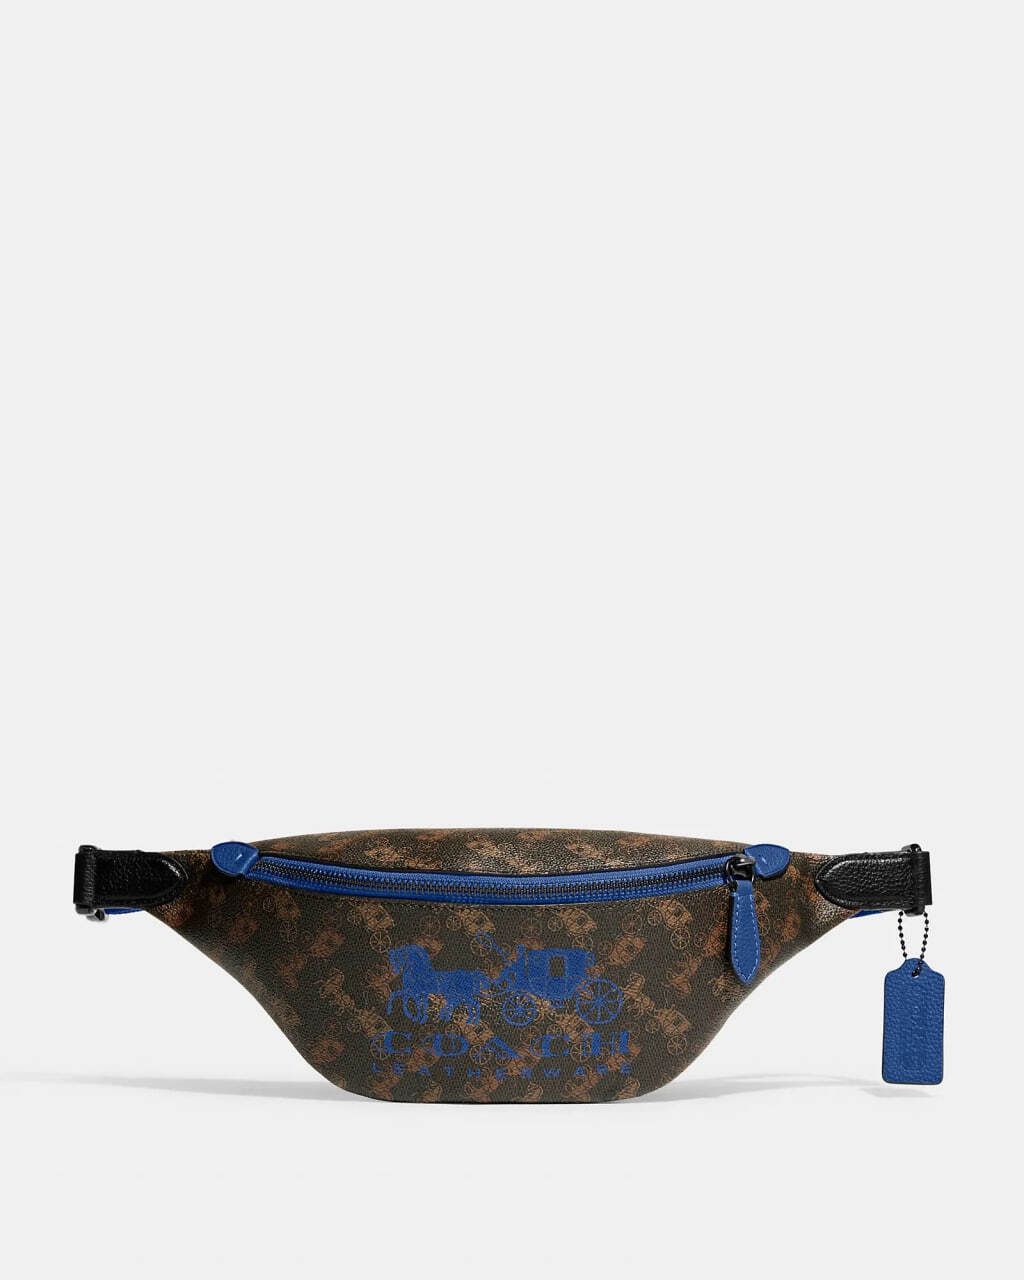 handbagbranded.com getlush outlet personalshopper usa Coach malaysia ready stock Coach Men Charter Belt Bag 7 With Horse And Carriage Print in Truffle